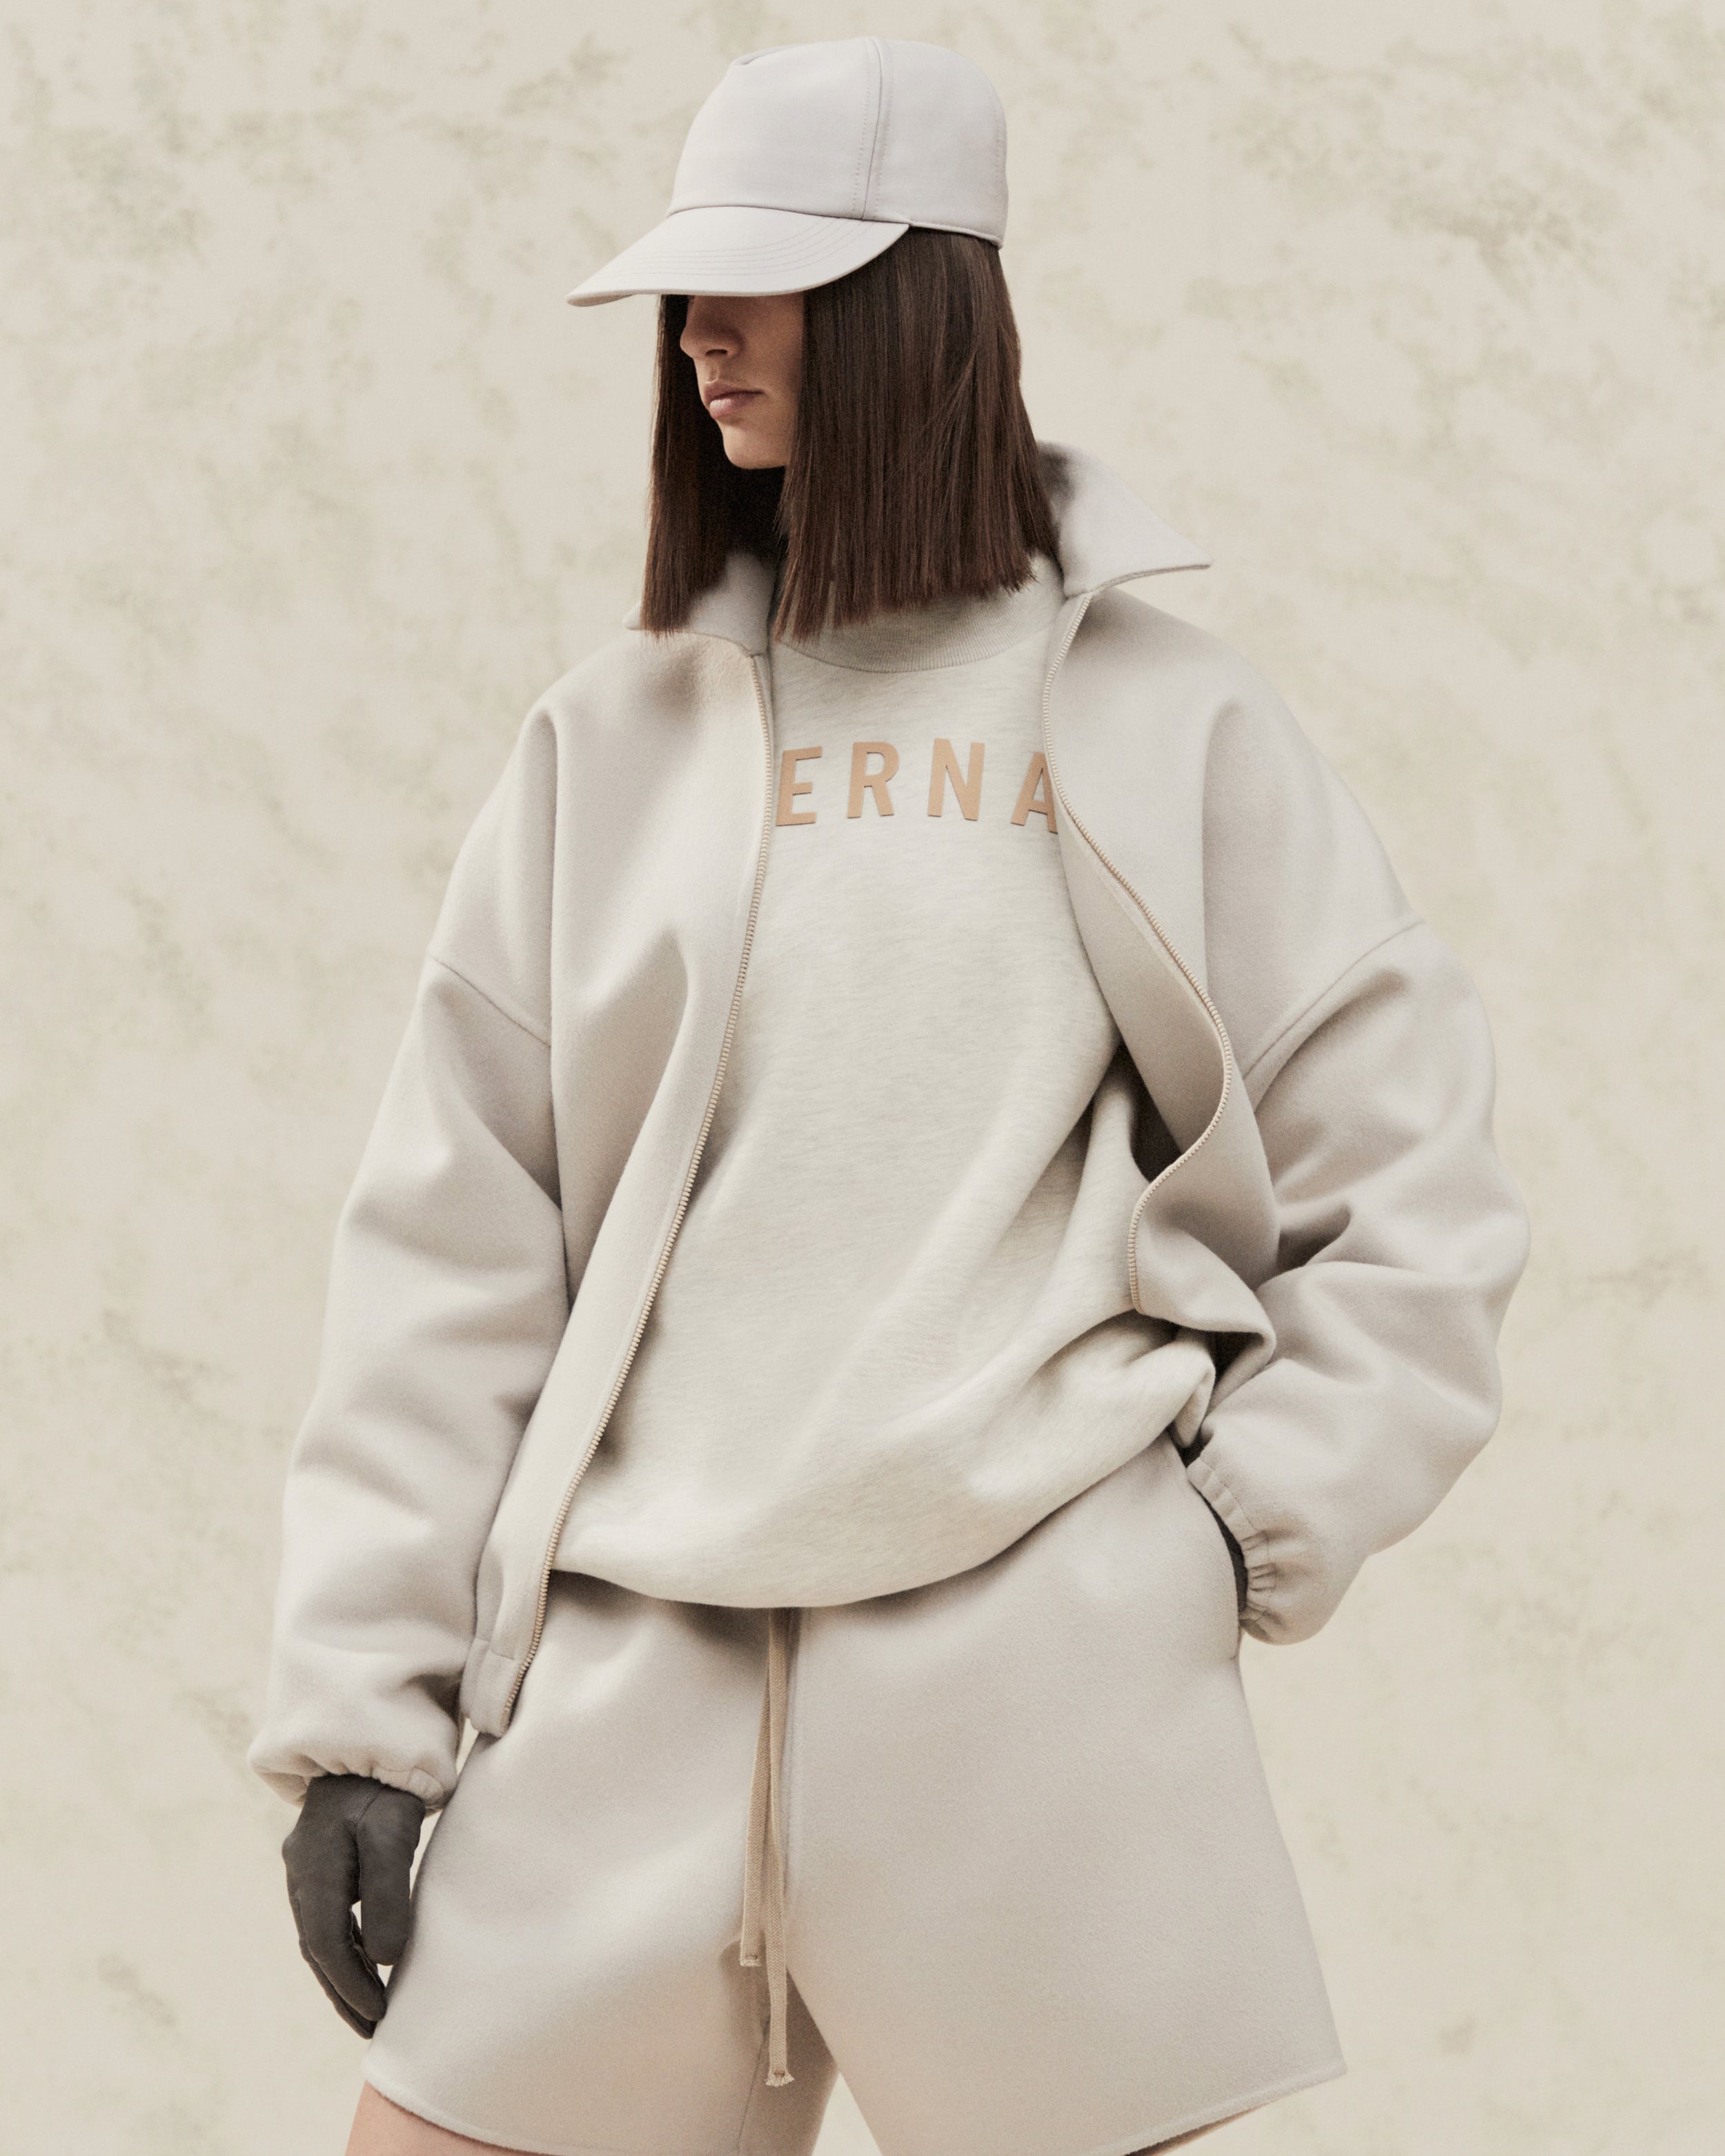 FEAR OF GOD THE ETERNAL COLLECTION